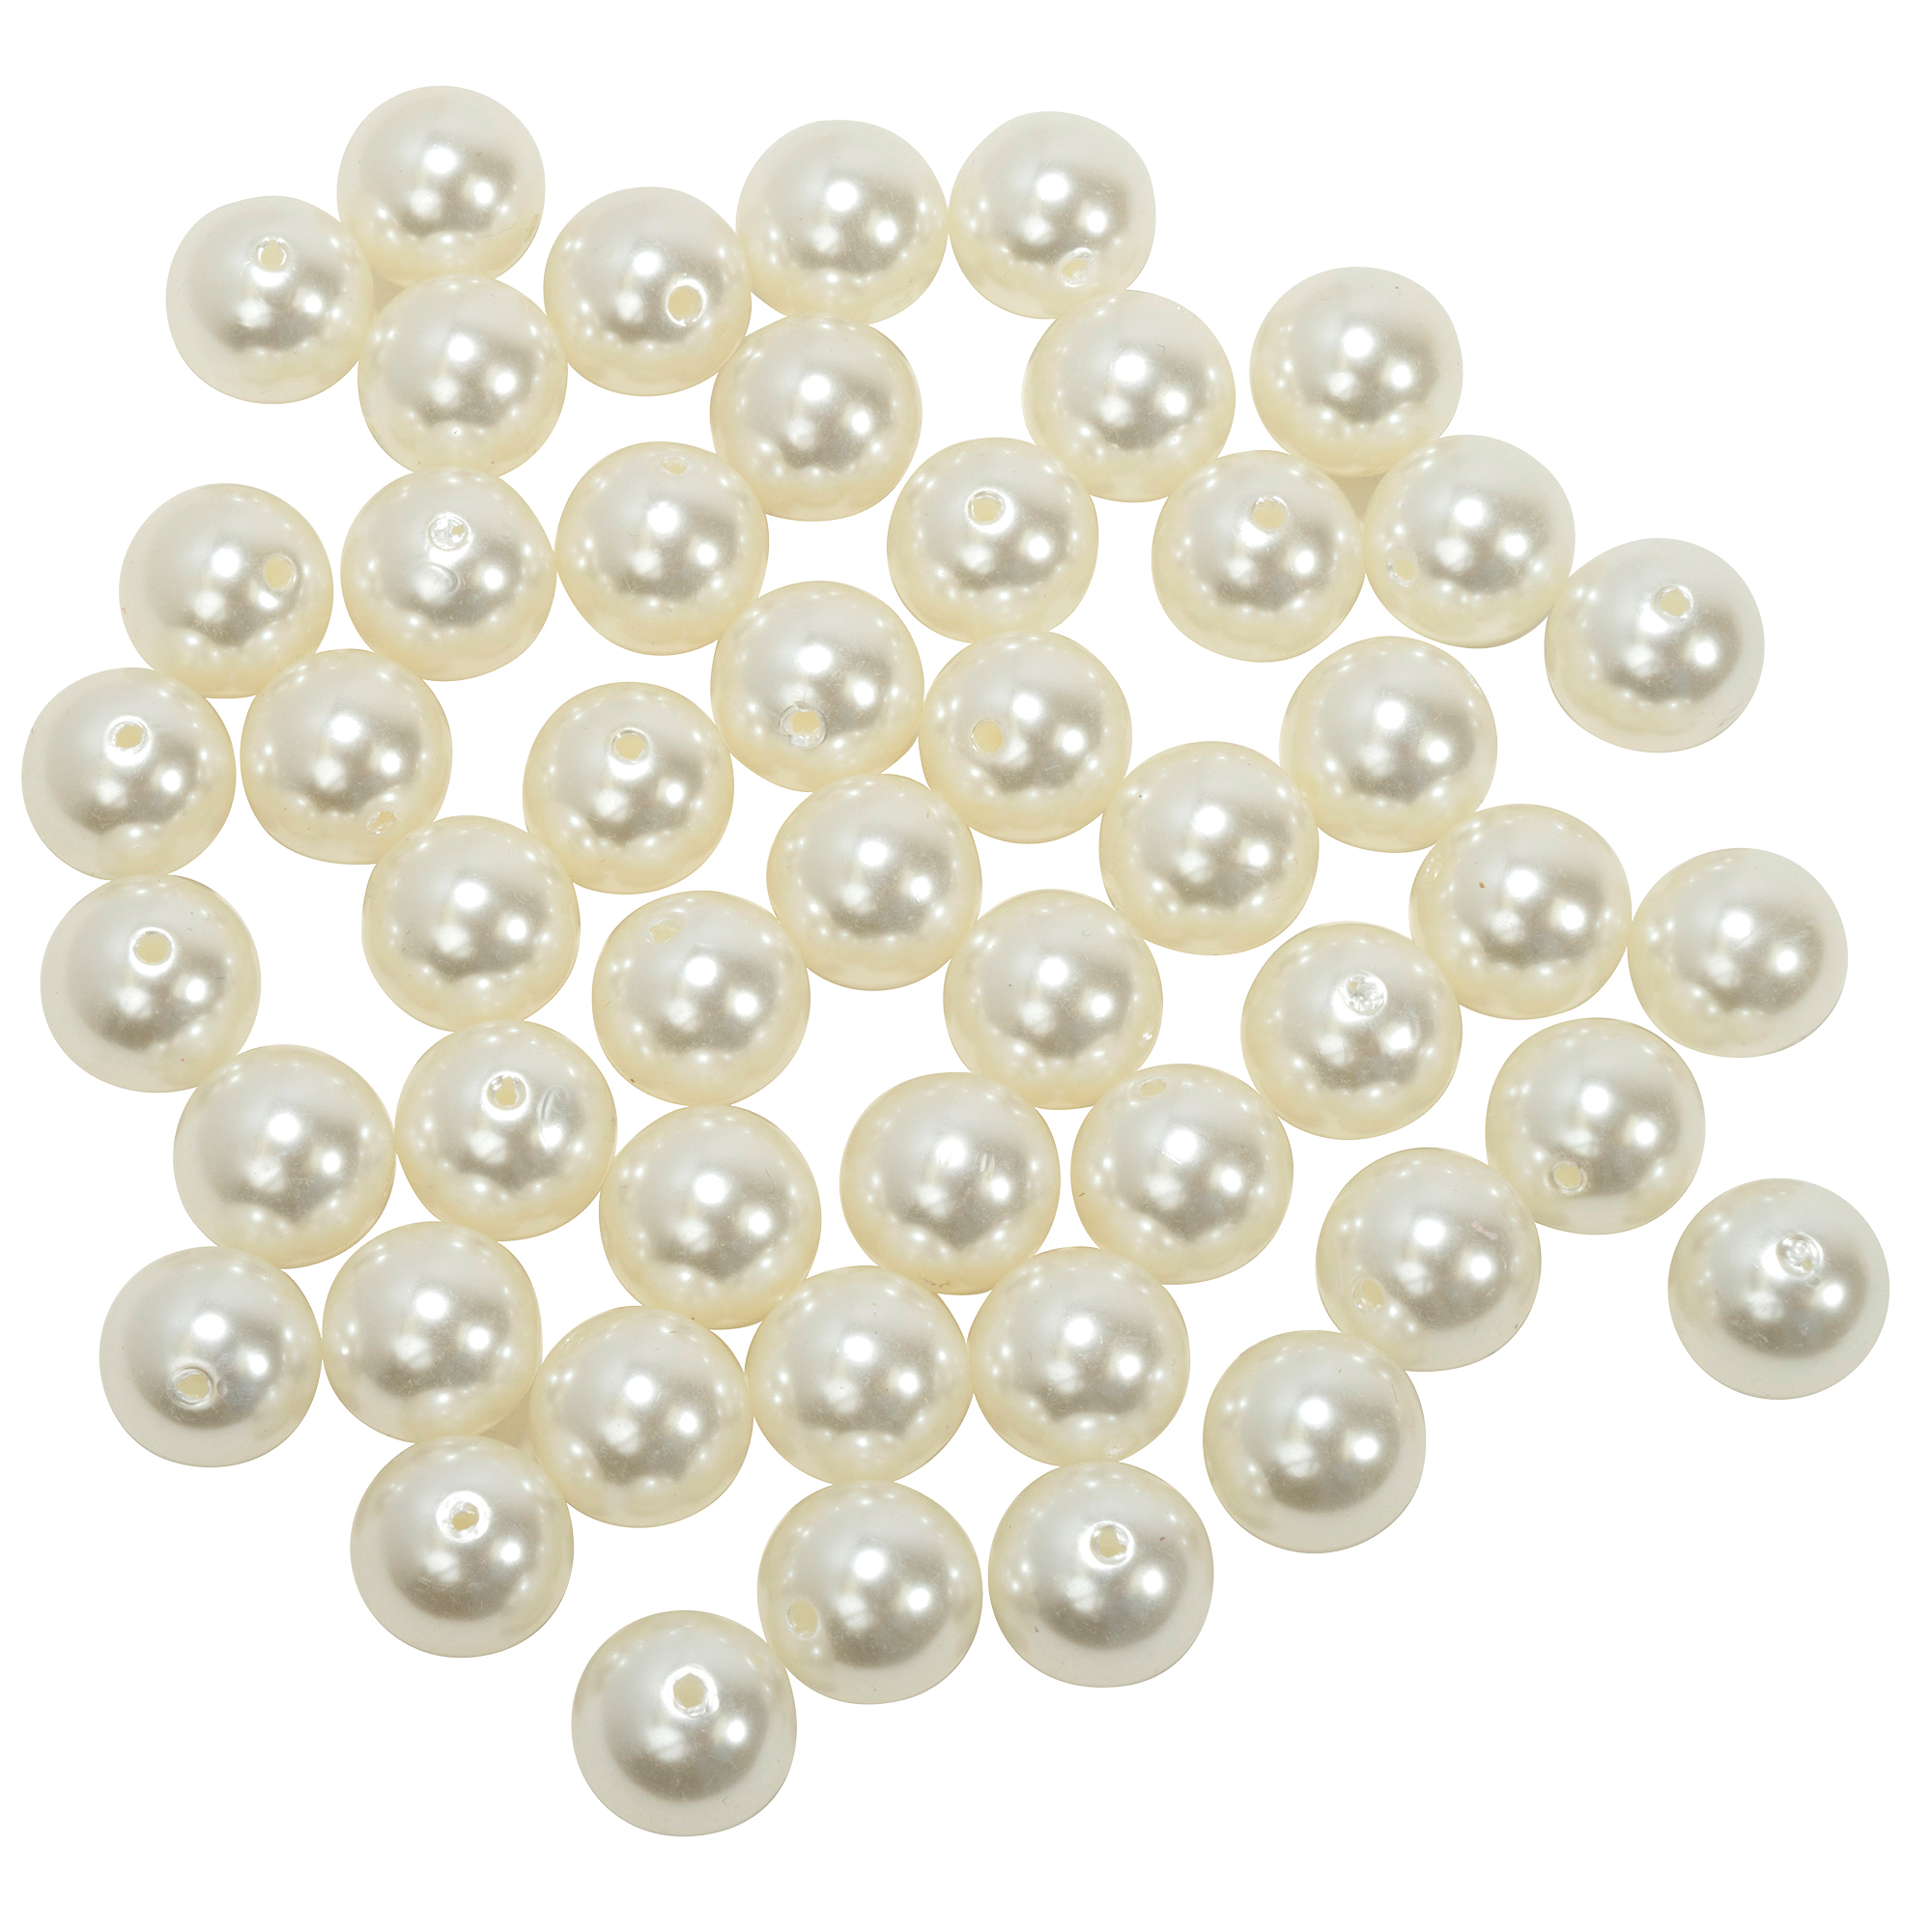 20mm Craft Pearl Beads With Hole 454g/Bag - Ivory